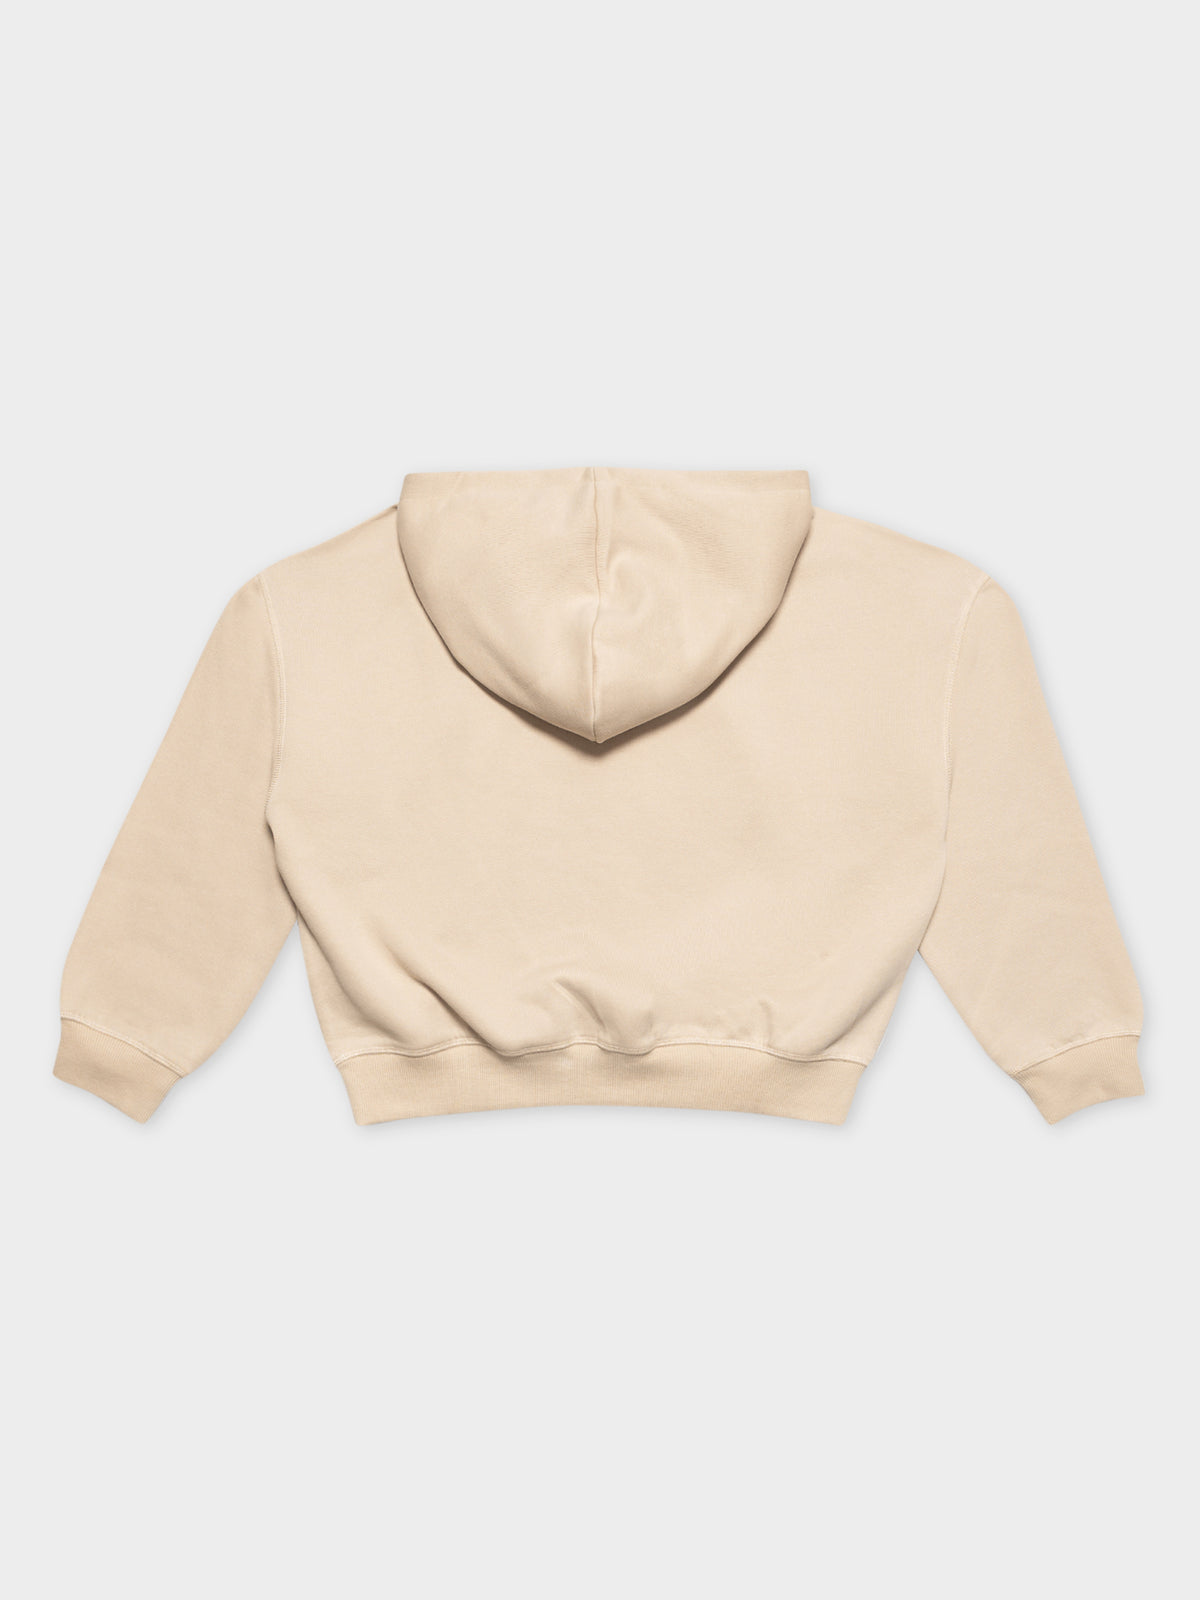 Carter Classic Hoodie in Sand